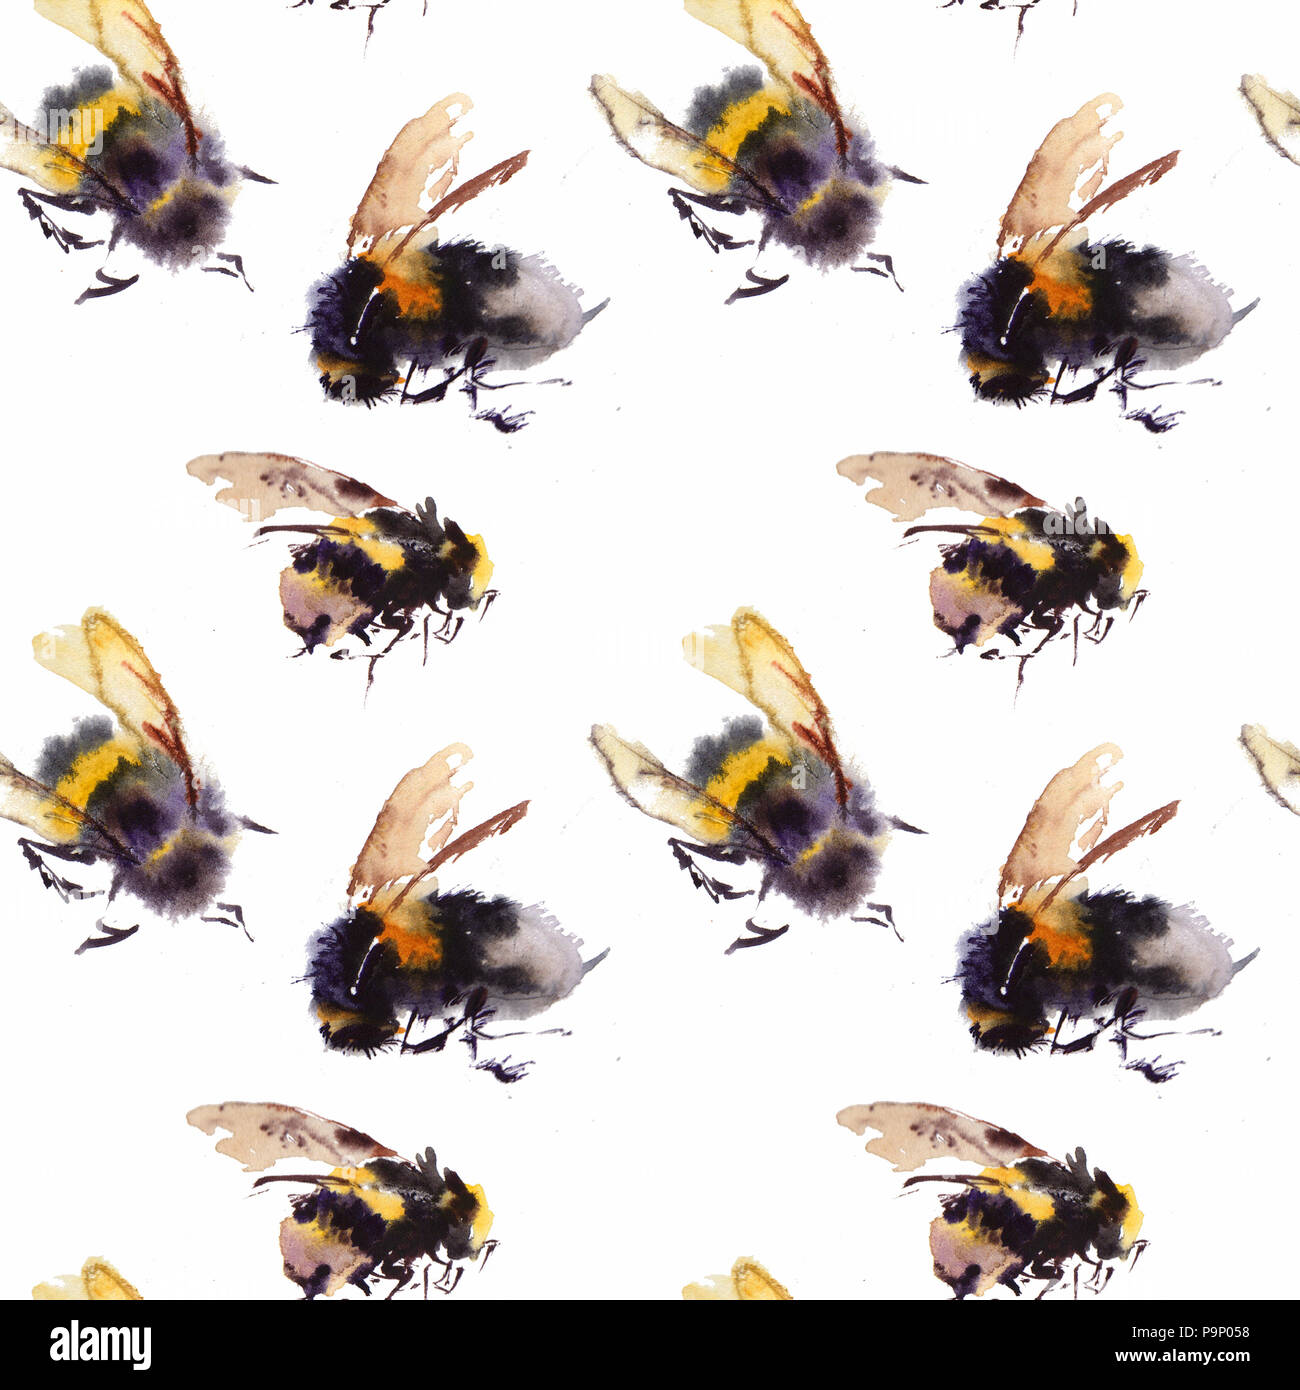 Watercolor bees seamless pattern isolated on white background. hand drawn watercolor illustration Stock Photo